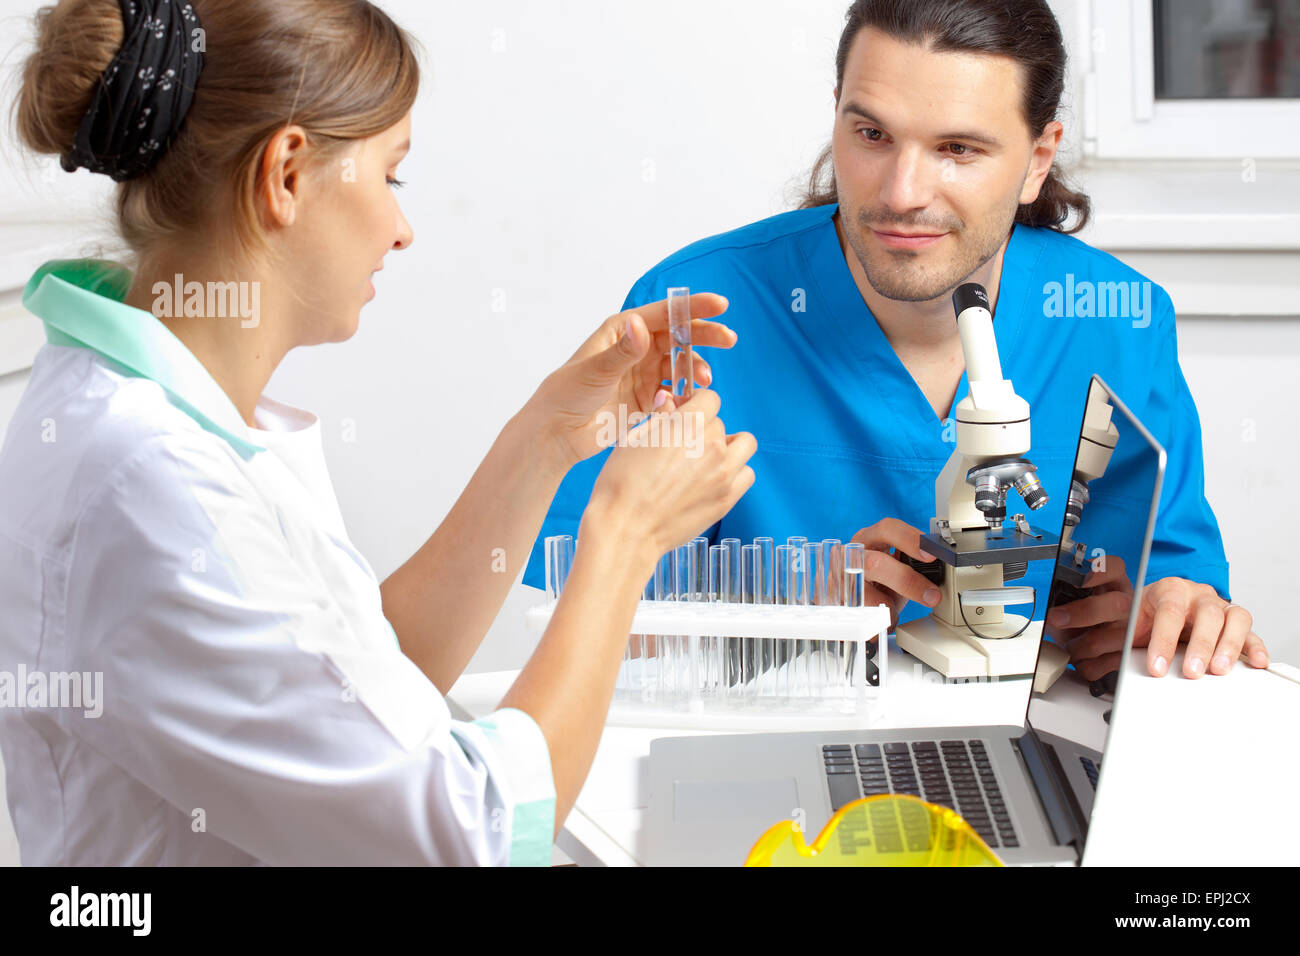 scientists develop a new drug Stock Photo